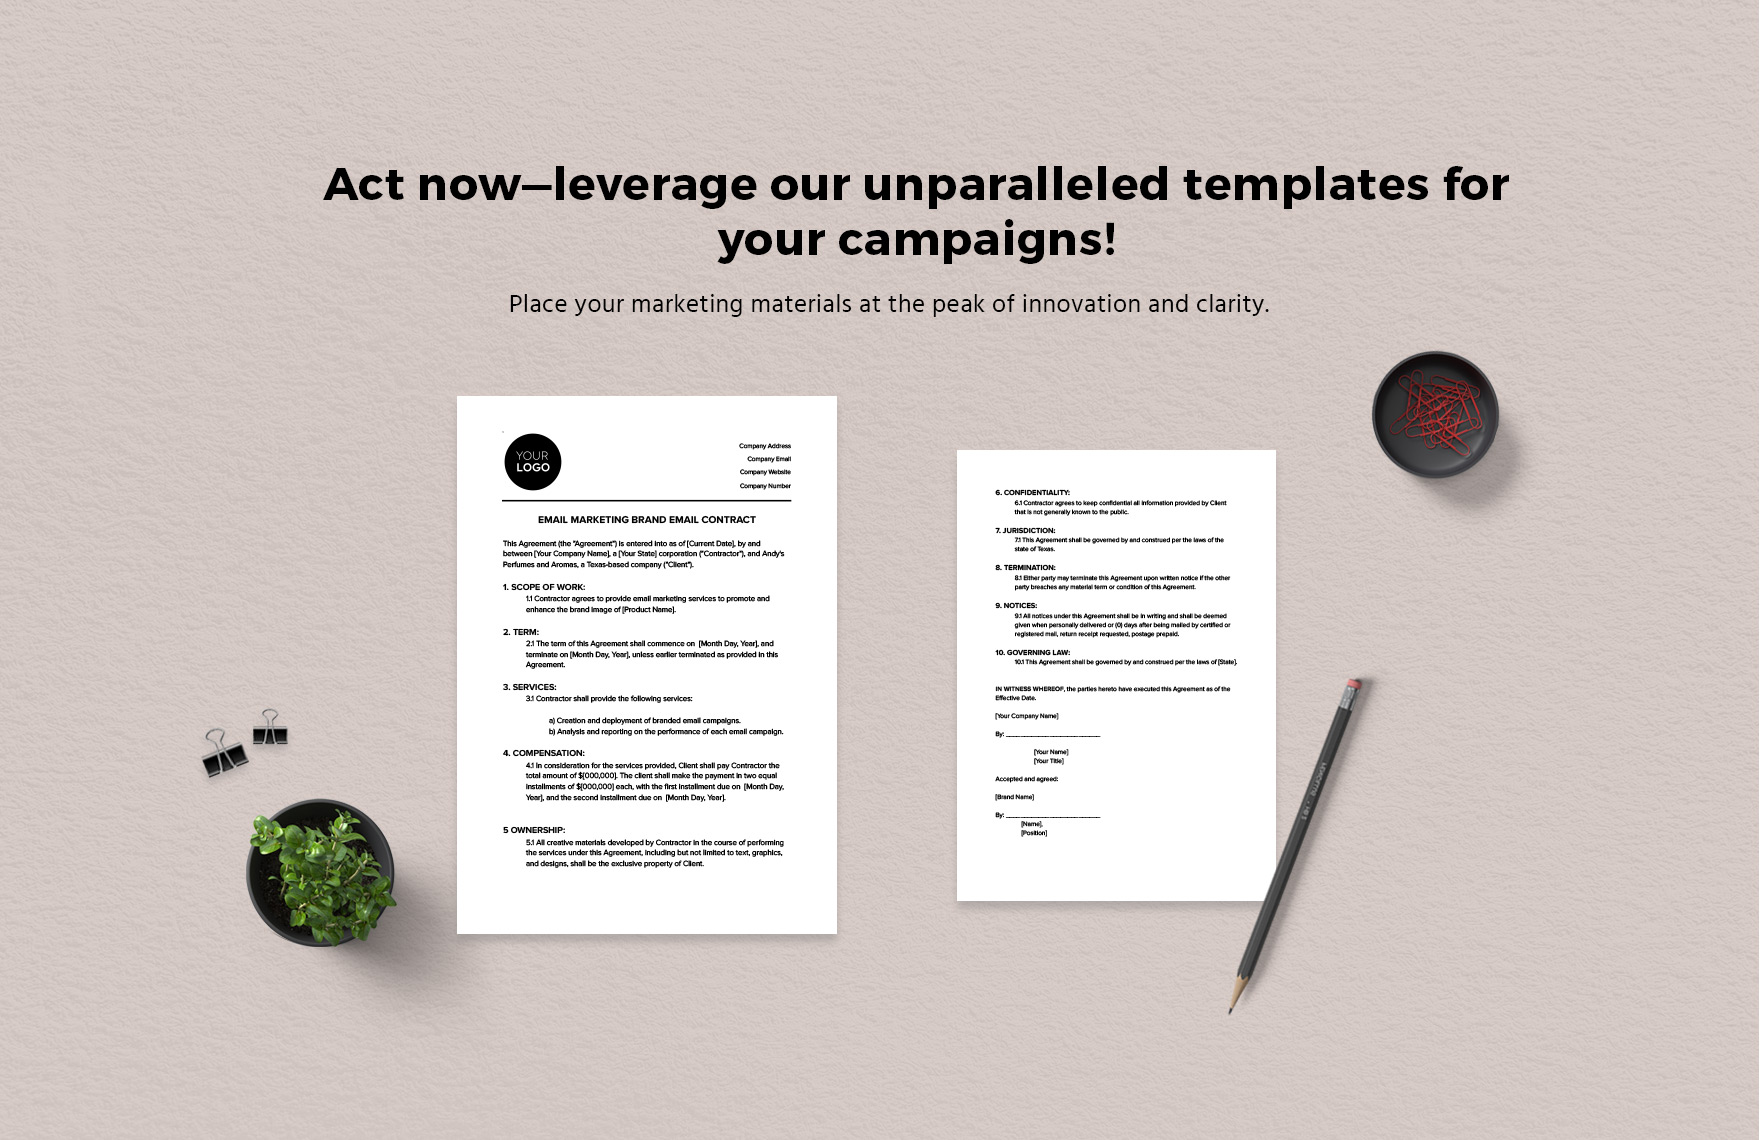 Email Marketing Brand Email Contract Template